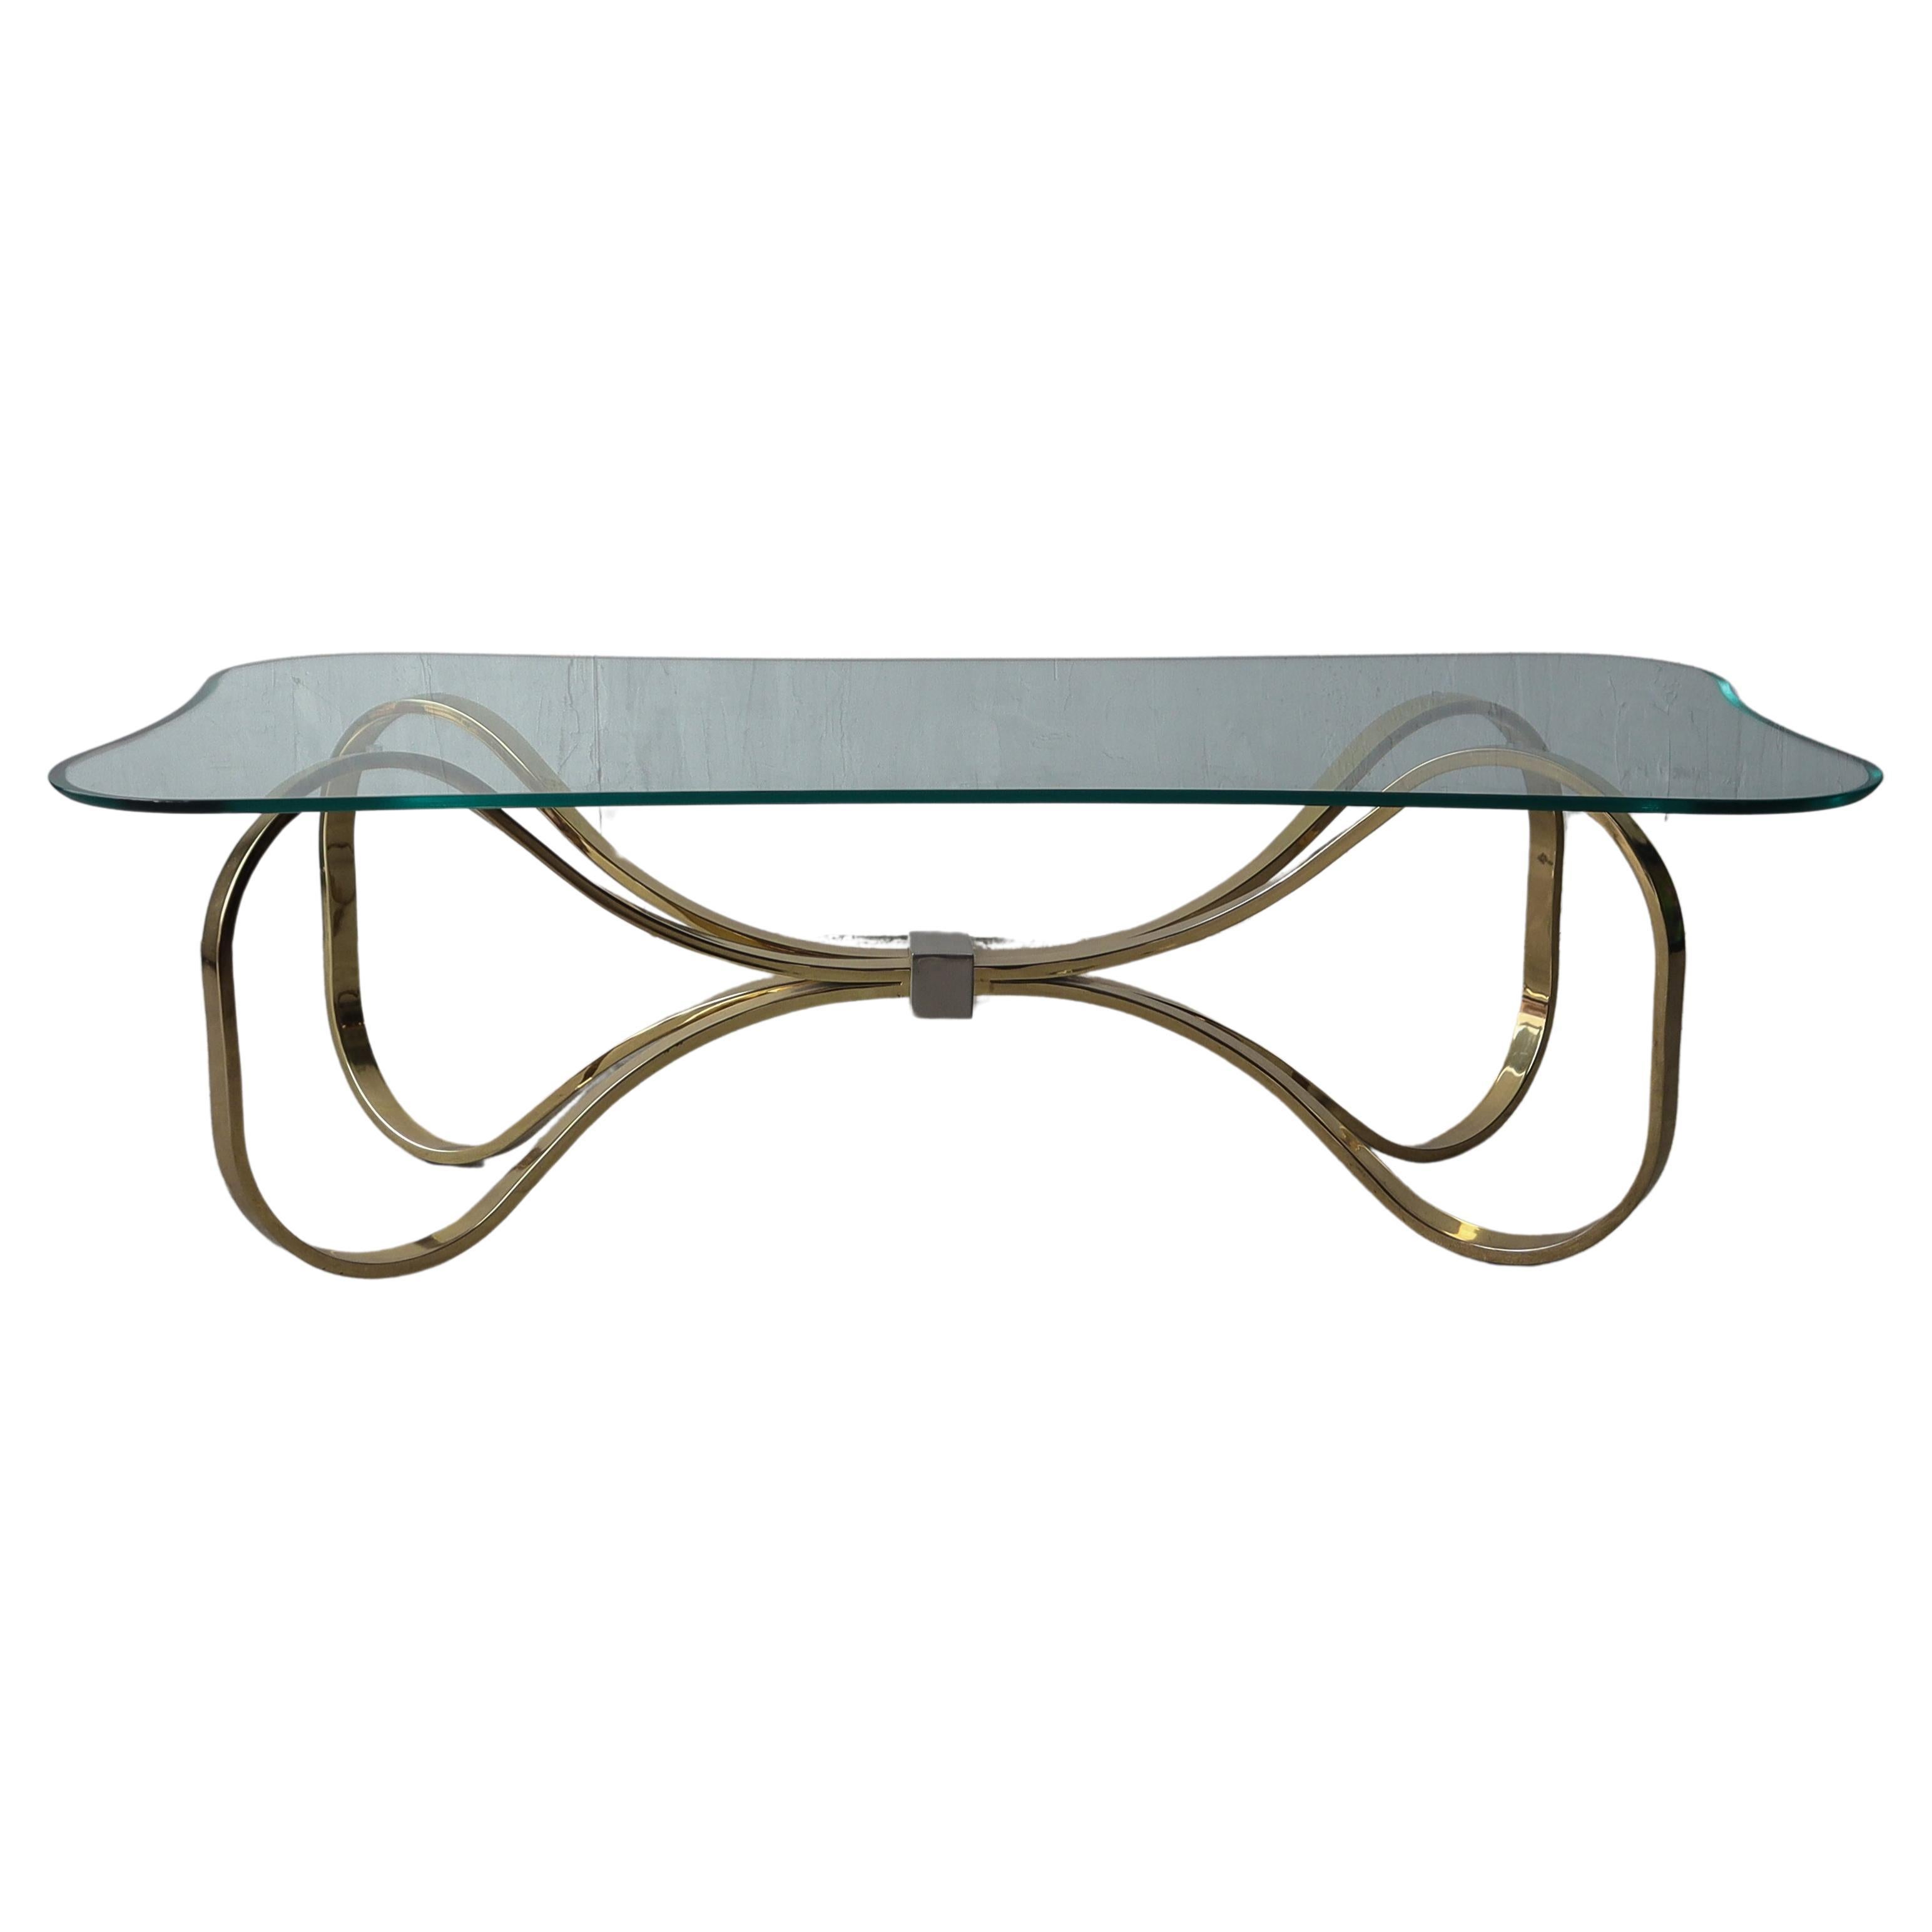 Regency Brass and Glass Bow Tie Coffee Table